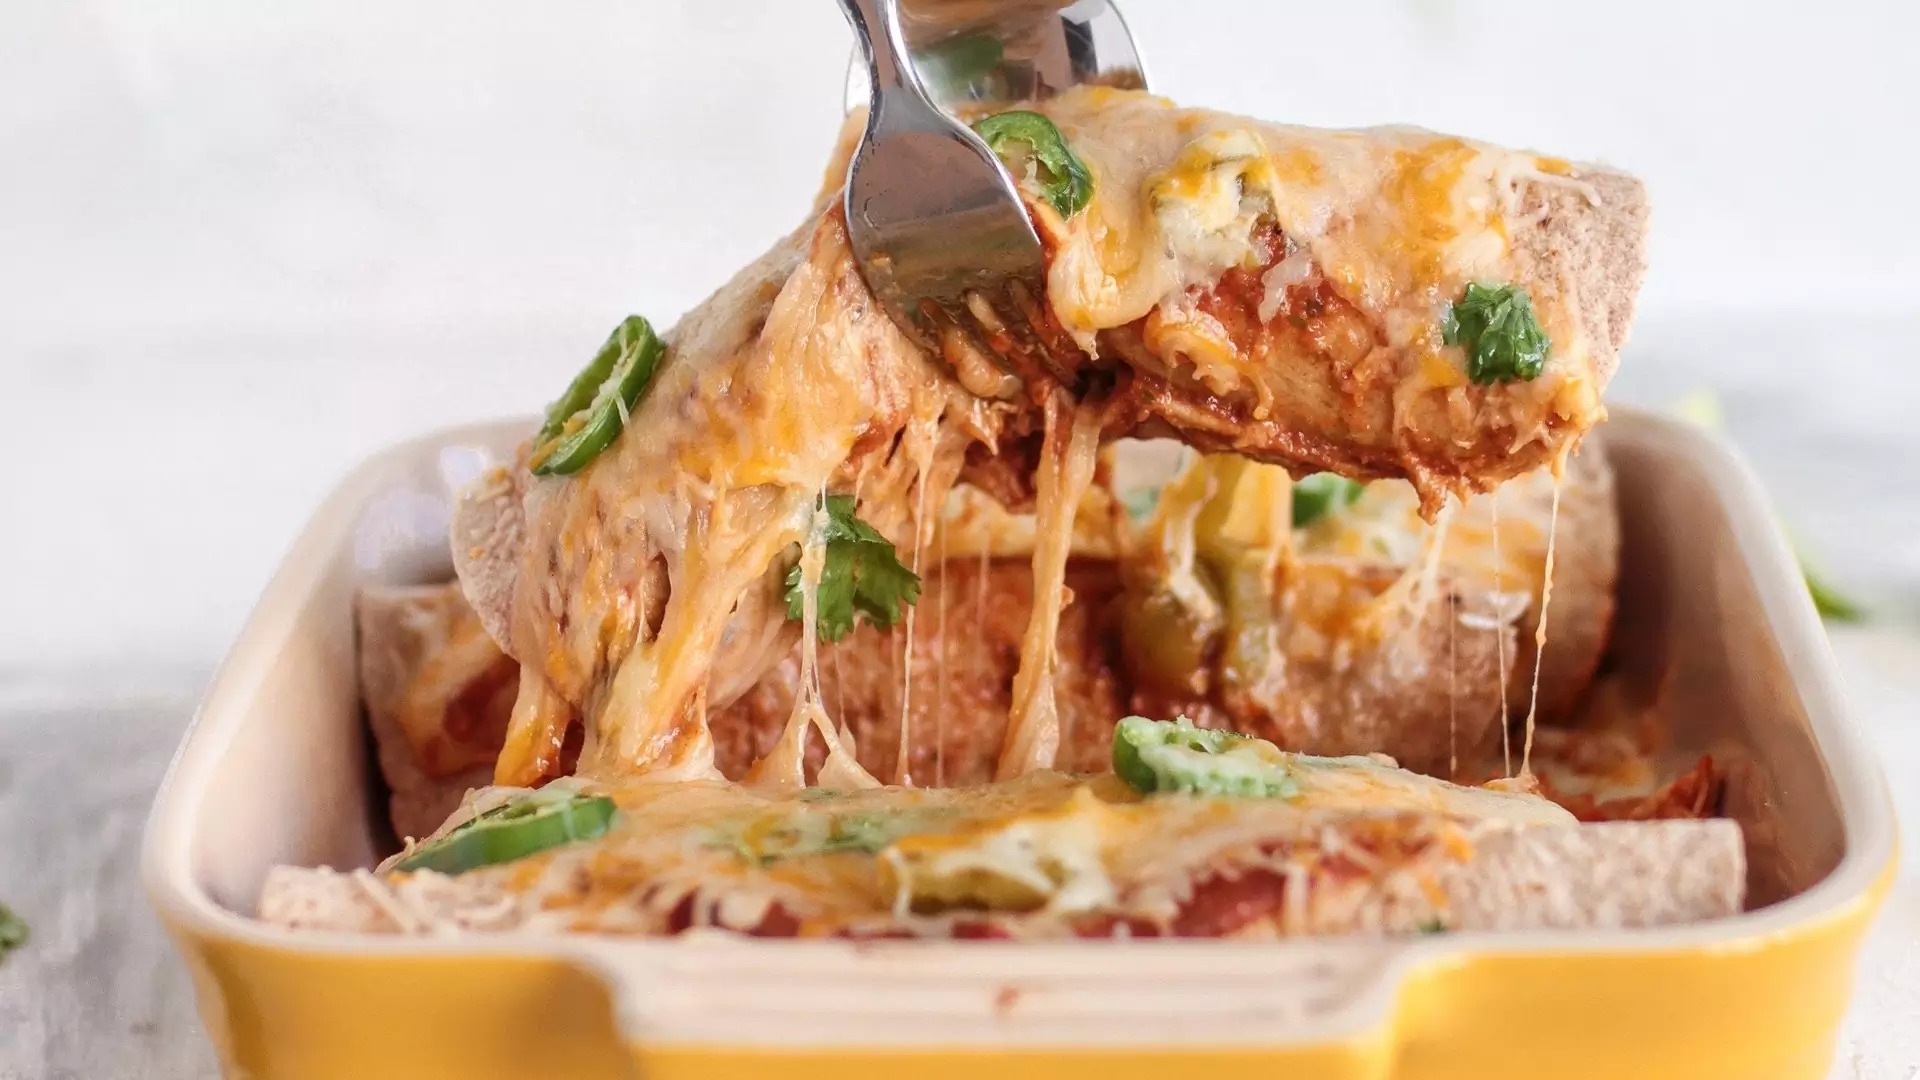 Mexican Baked Pancakes With Lots of Cheese and Sauce